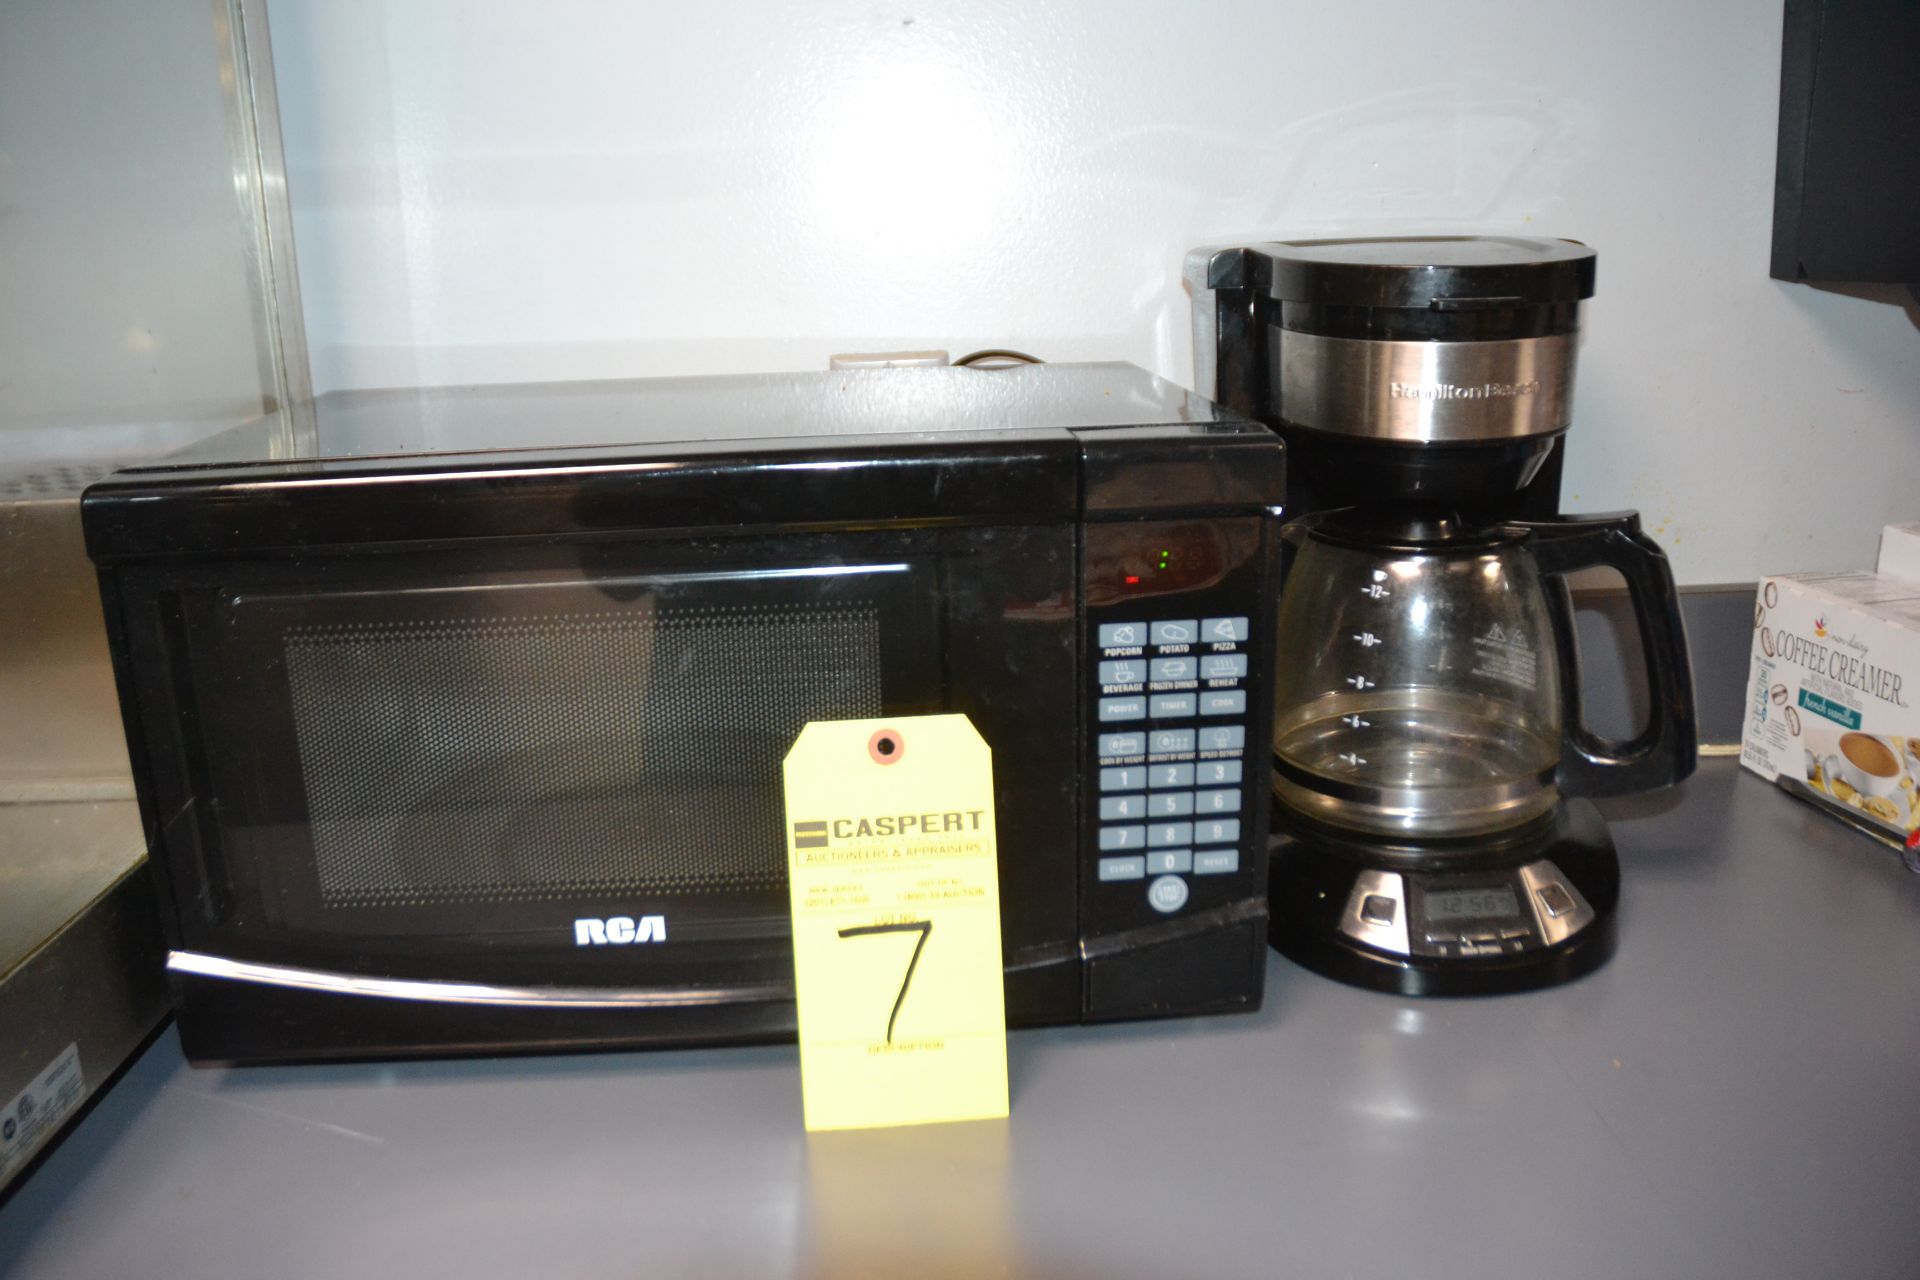 LOT - RCA Microwave Oven and Hamilton Beach Coffee Brewer